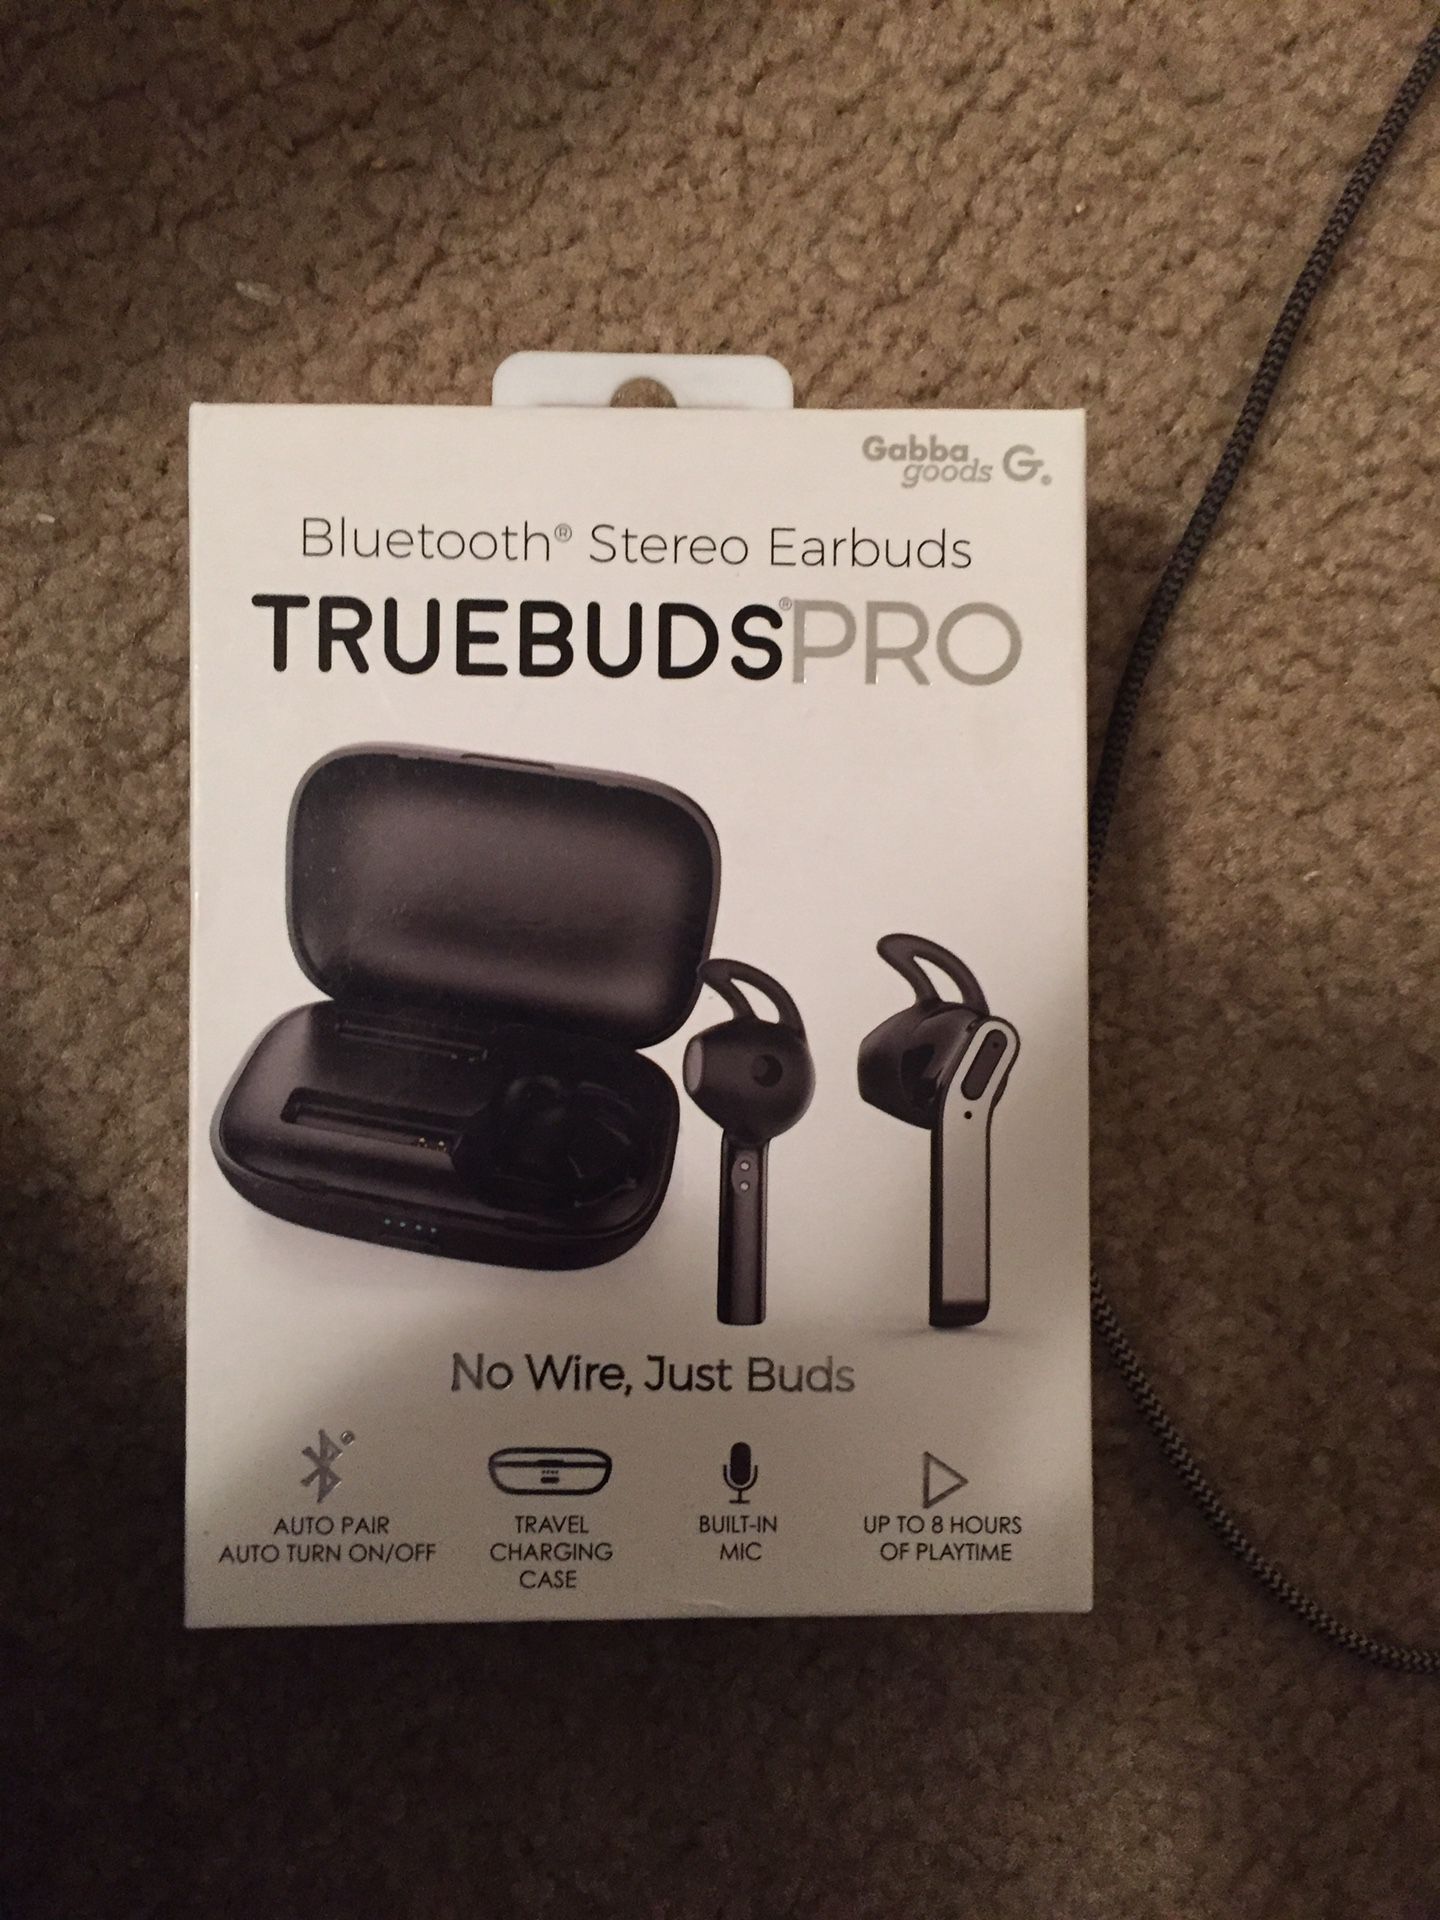 Brand new AirPods and LG headphones